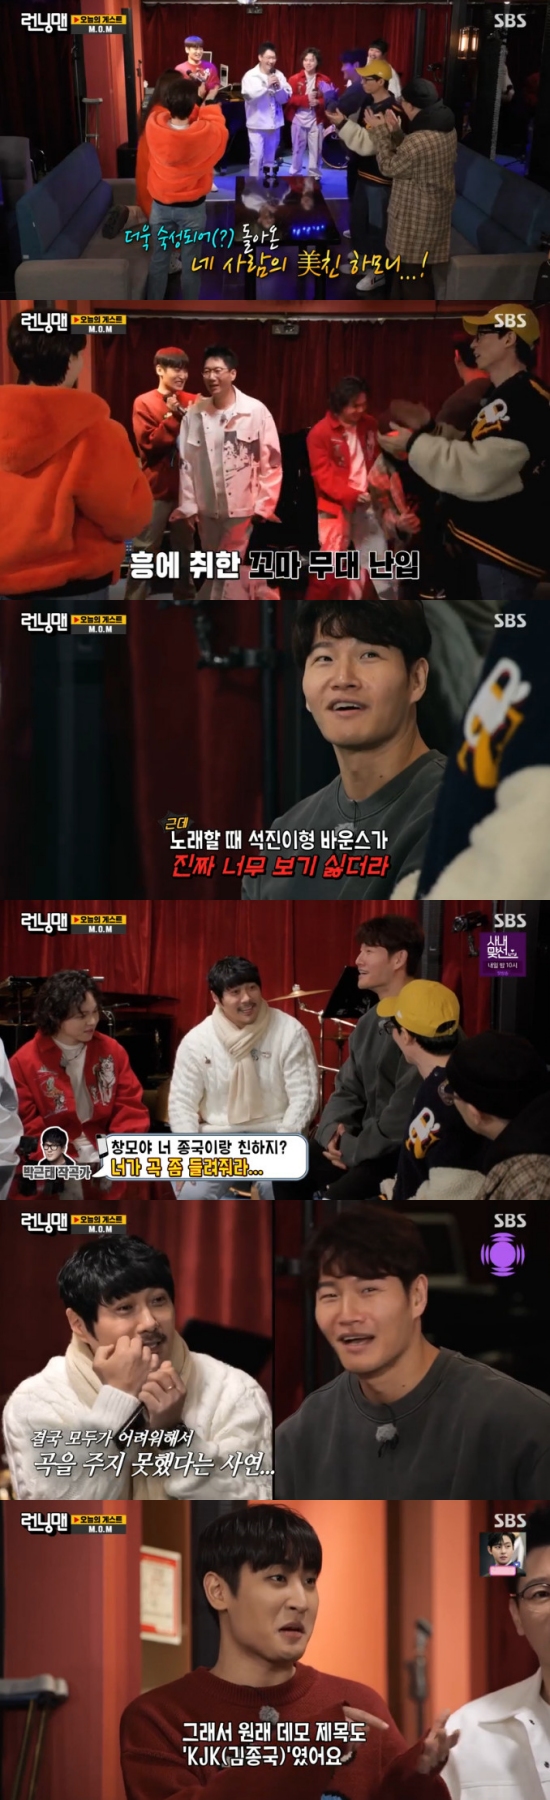 MBC Hangout with Yo and SBS Running Man collaboration was concluded.On SBS Running Man broadcasted on the 27th, As easy as it is race was decorated, and MSG Wannabe M.O.Ms new song Do you want to hear stage was released.On this day, the production team invited the project group M.O.M to Ji Suk-jin as a guest, and Ji Suk-jin could not hide his awkwardness unlike usual.KCM, Wonstein, and Park Jae-jung appeared, and M.O.M showed Will You Listen live stage.Ji Suk-jin called for Do not laugh when I sing, and M.O.M captivated the hearts of Running Man members with stable singing ability and sweet tone.Yoo Jae-Suk then rejoiced, saying, Its finally a collaboration (Hangout with Yo and Running Man; I picked it too well.Kim Jong-kook teased, I didnt want to see Seokjins Bounce when I was singing, and I felt like I was having an eight-year-old feast alone.In addition, KCM commented on the behind-the-scenes story of Do you want to hear it? Thank you to my last brother.I wanted to do a project with my brother and me, so (composer) Geun Tae-hyung sent me a guide song. KCM said, Isnt it difficult for my last brother to say to me, Youre close to the end. You tell me a song.I was not so comfortable and difficult, Park Jae-jung said, The original demo title was also like KJK.In particular, Yoo Jae-Suk said, If you are like other broadcasters, you will stop it.Because it is a group that I did in other broadcasts, Kim Jong-kook said, If you are like this before, you will come out and sing and go.Not only that, Yoo Jae-Suk said of KCM, In recent years, KCM is equivalent to a comedy.I laughed so much when I appeared in my program a while ago, Kim Jong-kook said, It was more funny because I was fat. Yoo Jae-Suk said: Dont you exercise a lot, Im not in control at all, I imagine that too.After 10 years and 20 years, I will not be able to manage my body like KCM. I have a lot of affection when I see comments with (M.O.M) members, its different from what were saying, Jeon So-min told Ji Suk-jin.Kim Jong-kook said, There is no original afternoon, and Song Ji-hyo said, There is not much.Yoo Jae-Suk said, If you are close for too long, you do not say that, but you are actively doing it to a new person. Jeon So-min said, I have not known.My brother did not give me a lot of money at first. Eventually, Ji Suk-jin explained, It takes time to get close at first.Photo = SBS broadcast screen